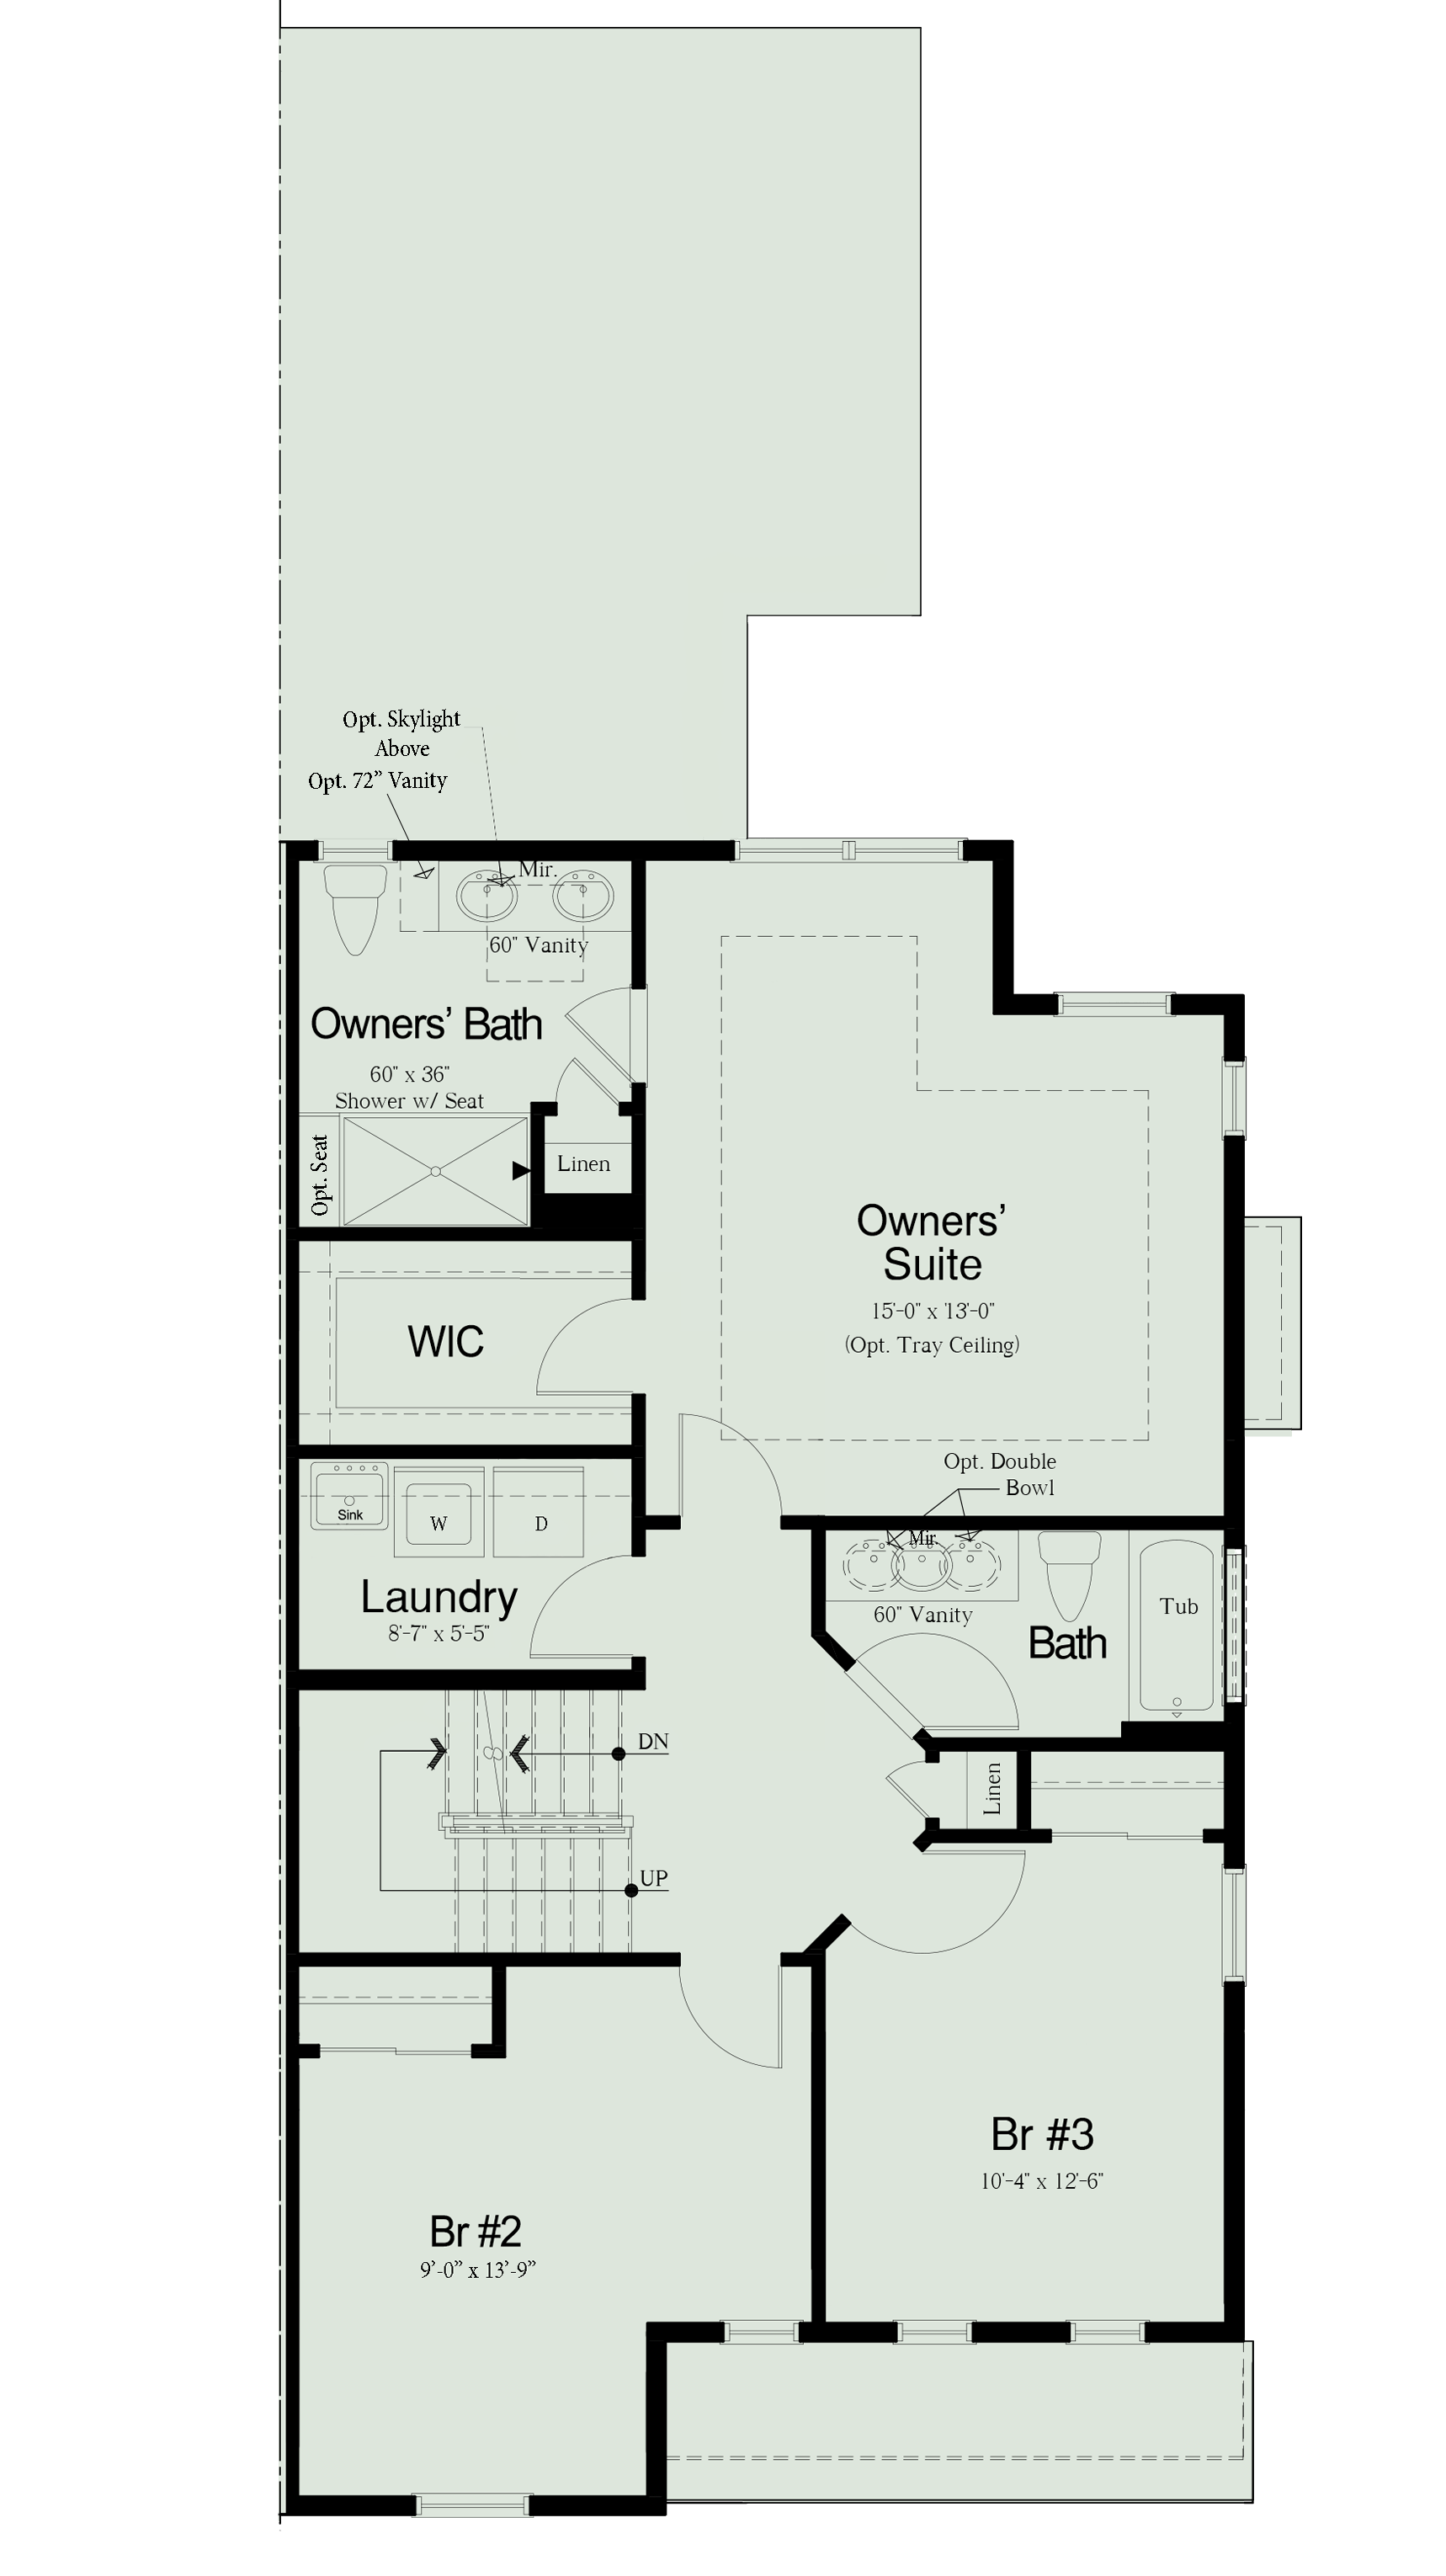 FT ELEVATION 3A 2ND LEVEL FLOOR PLAN LAUNDRY-1